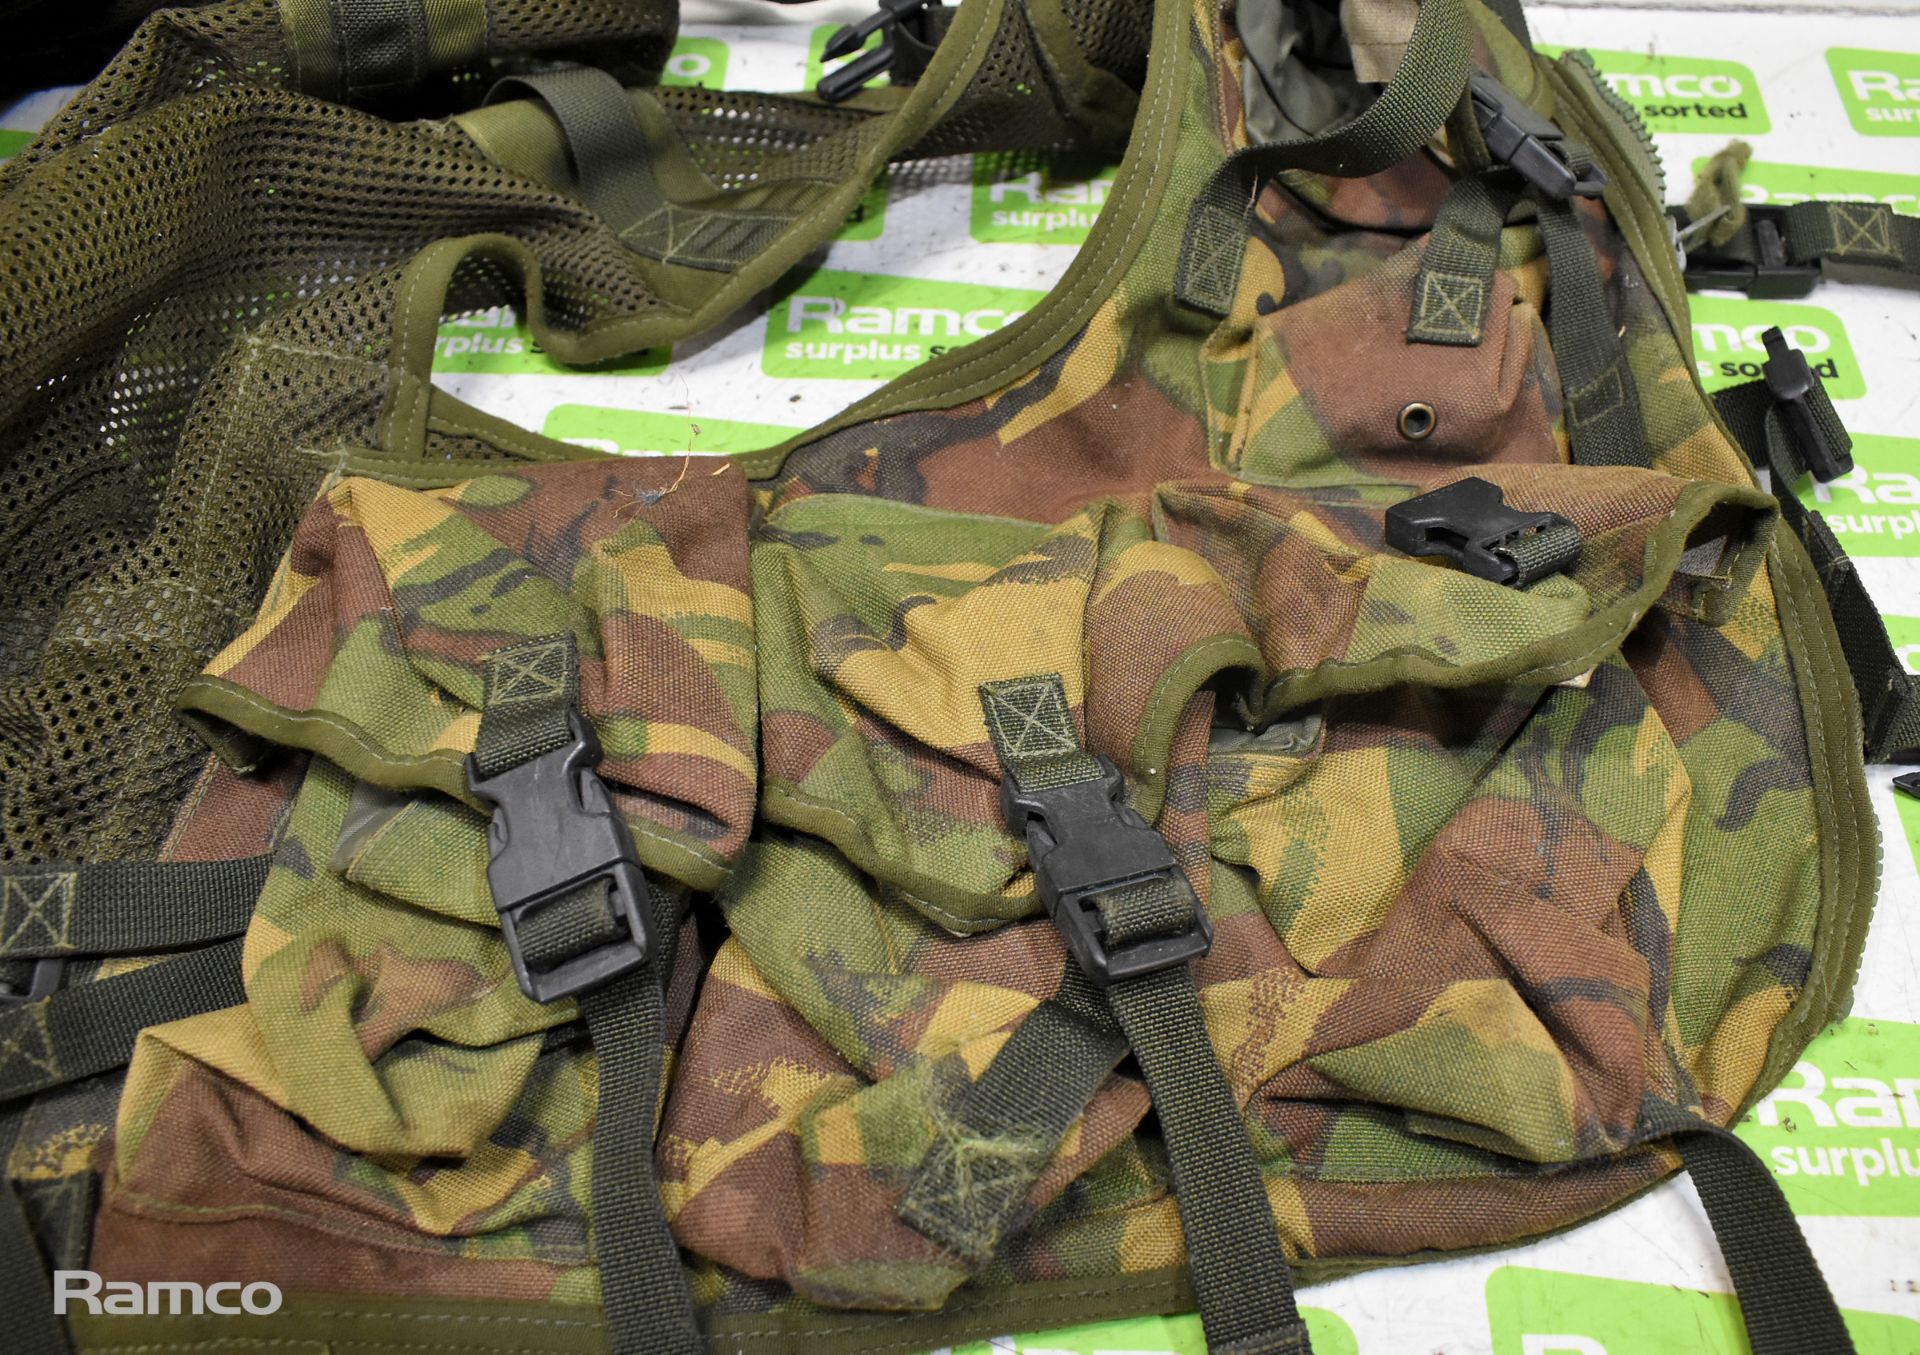 29x British Army DPM vests with pouches - mixed grades and sizes - Image 5 of 9